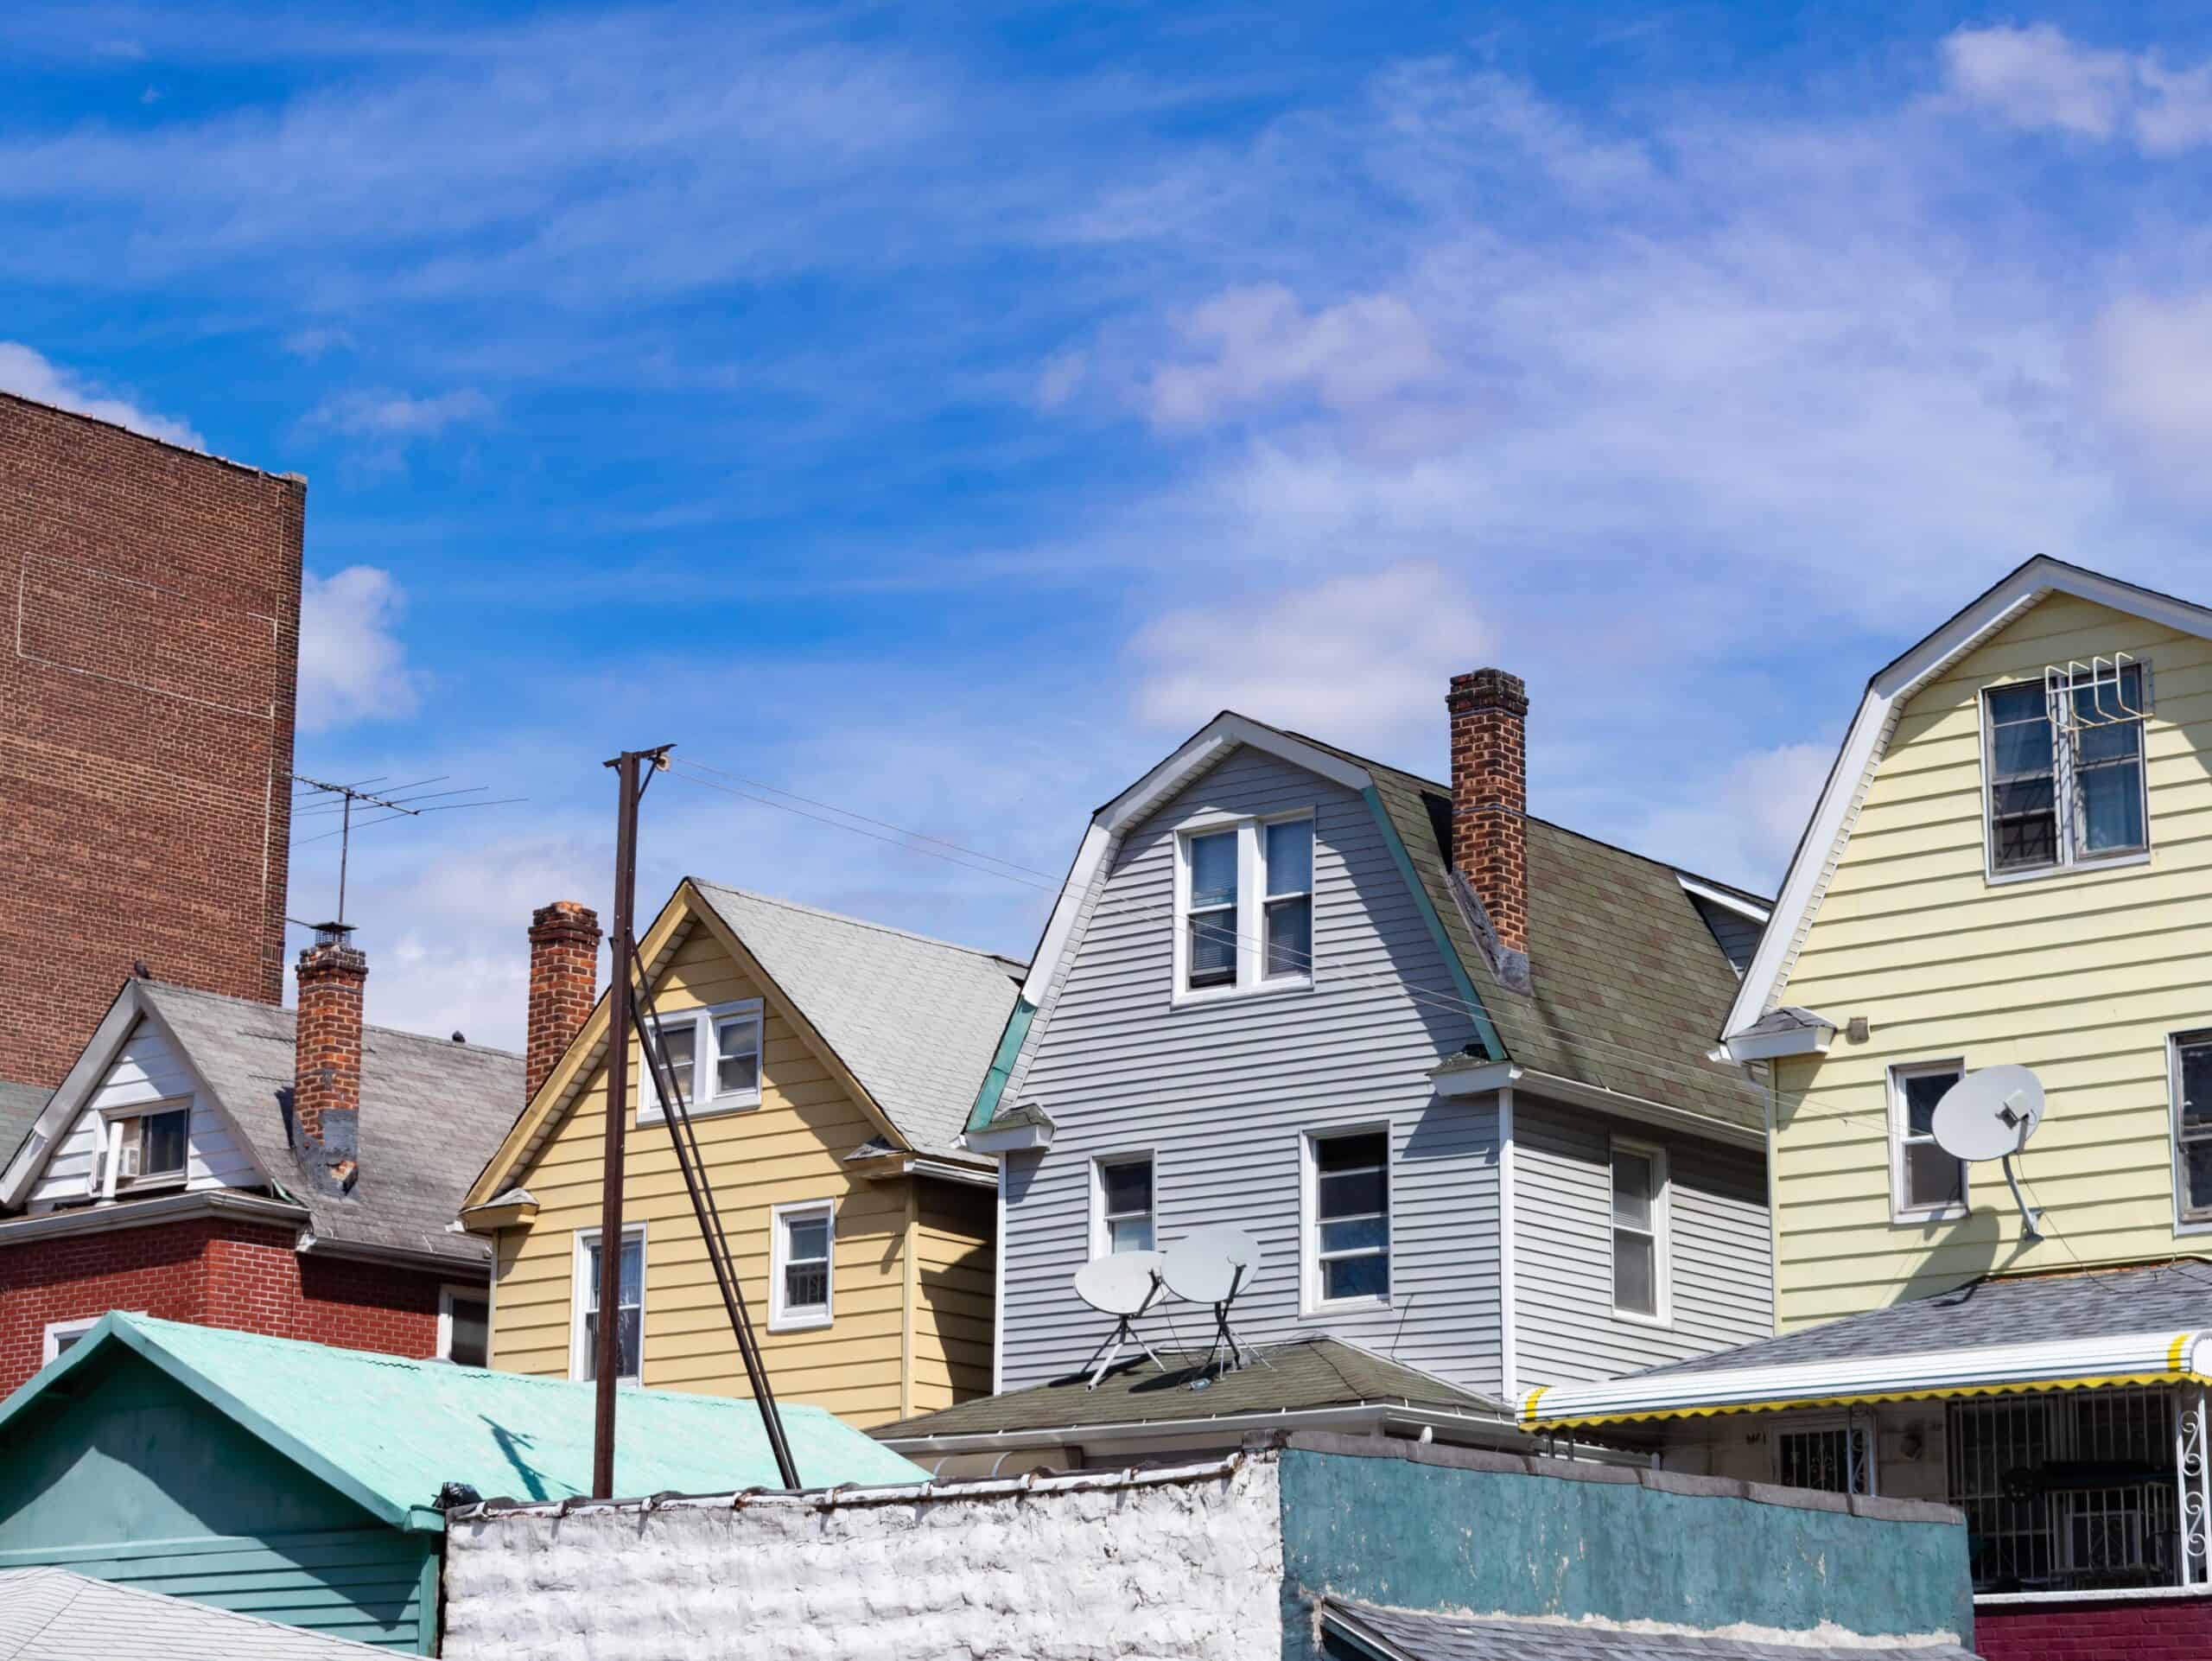 Woodside Queens New York | Row of Old Wood Homes in Woodside Queens New York